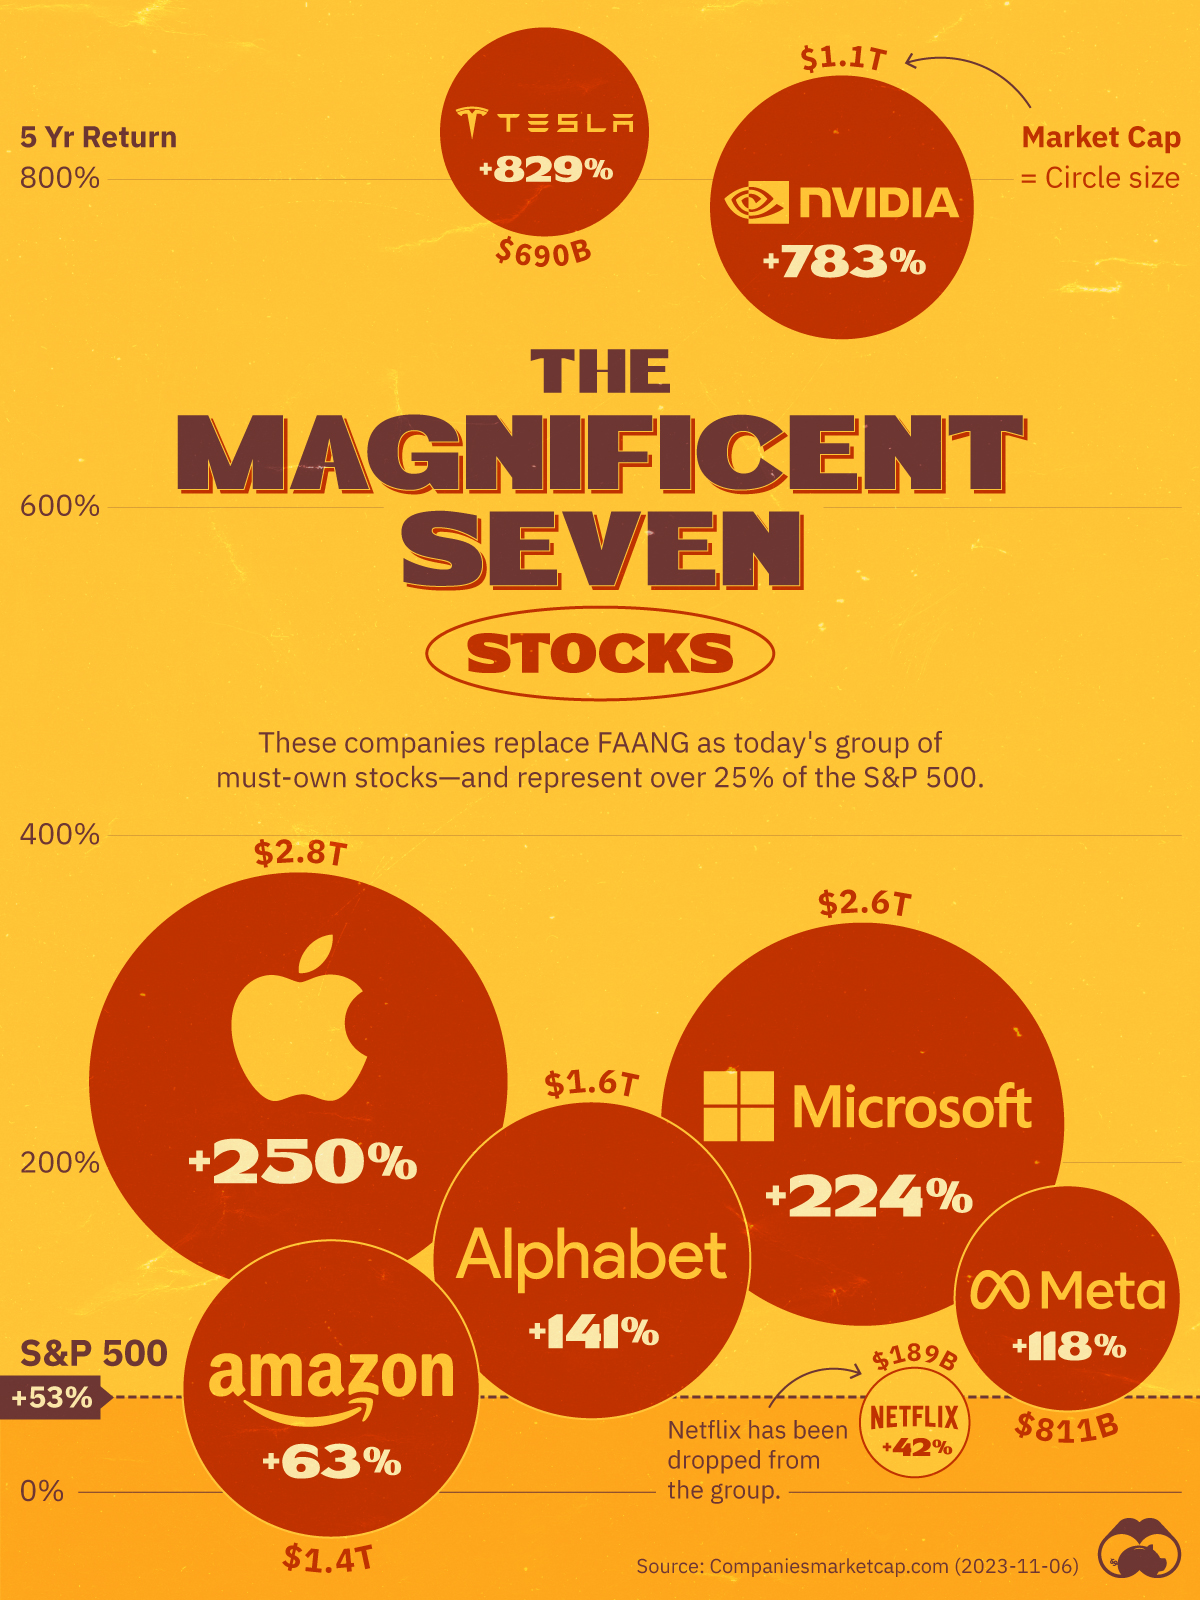 This chart highlights the Magnificent Seven stocks, a group of seven megacap stocks that replace the previous FAANG.